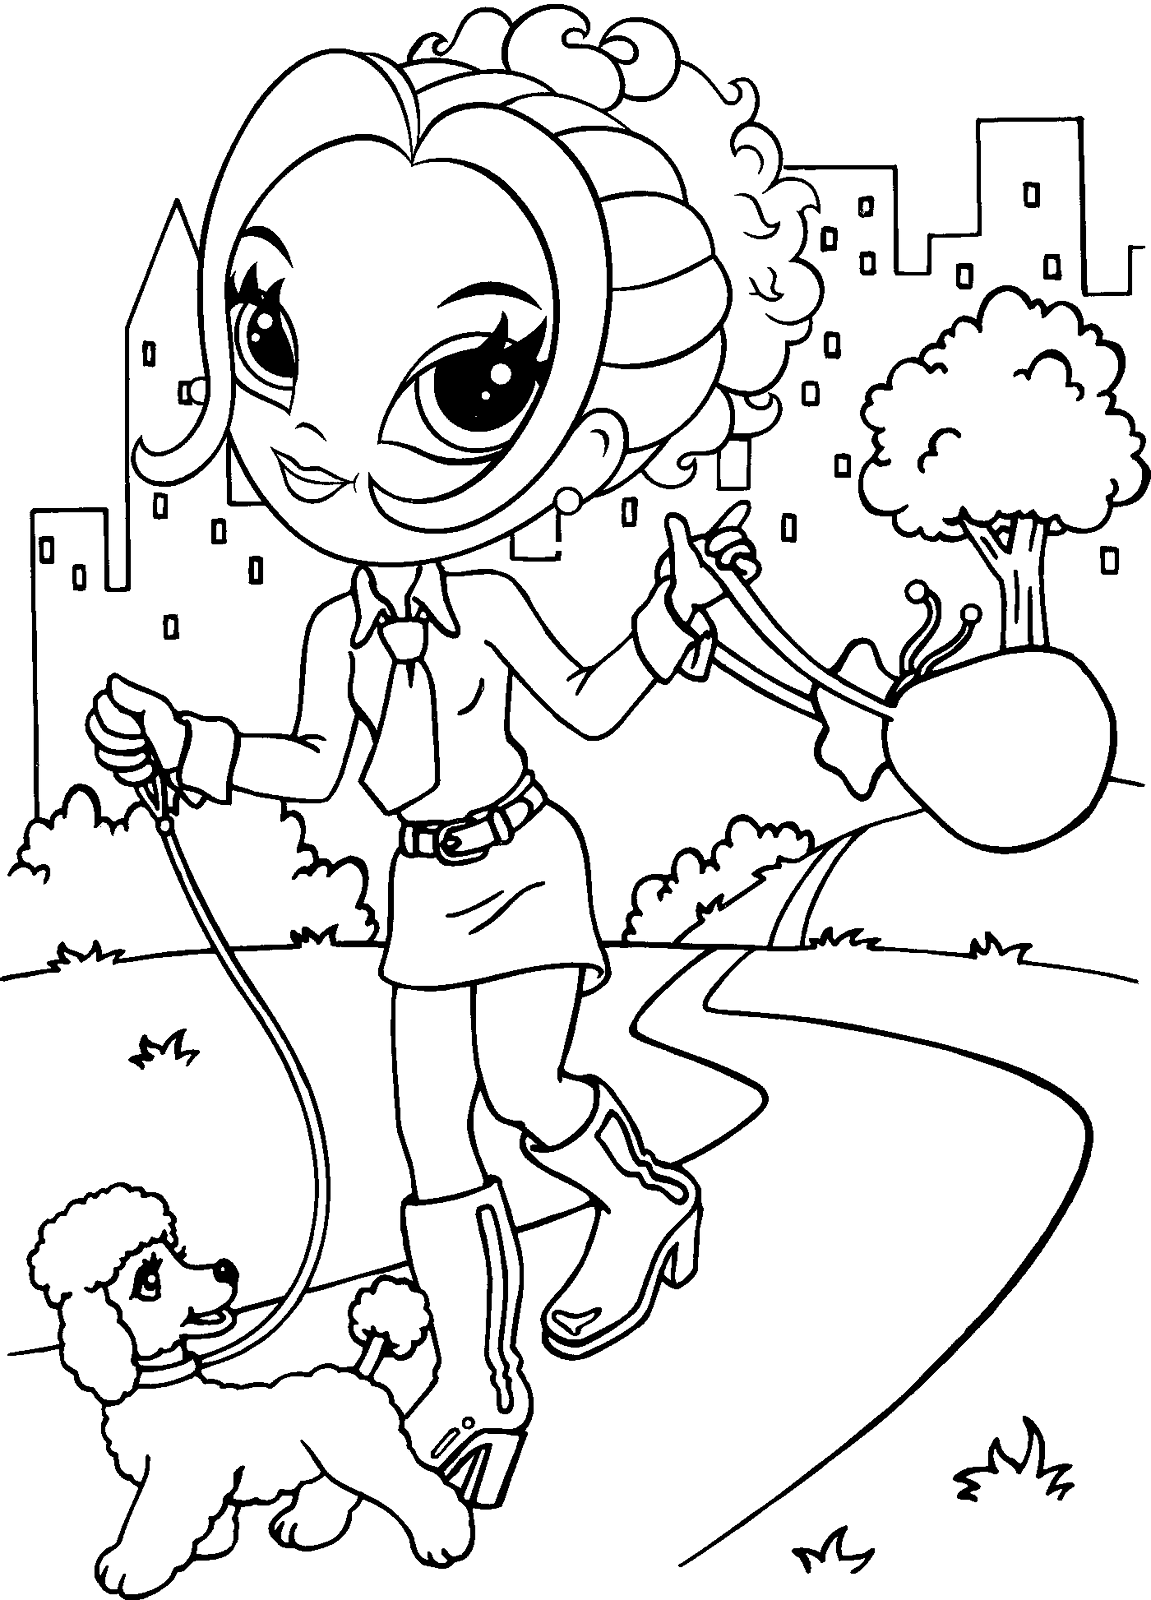 Coloring page - Girl is walking her pet